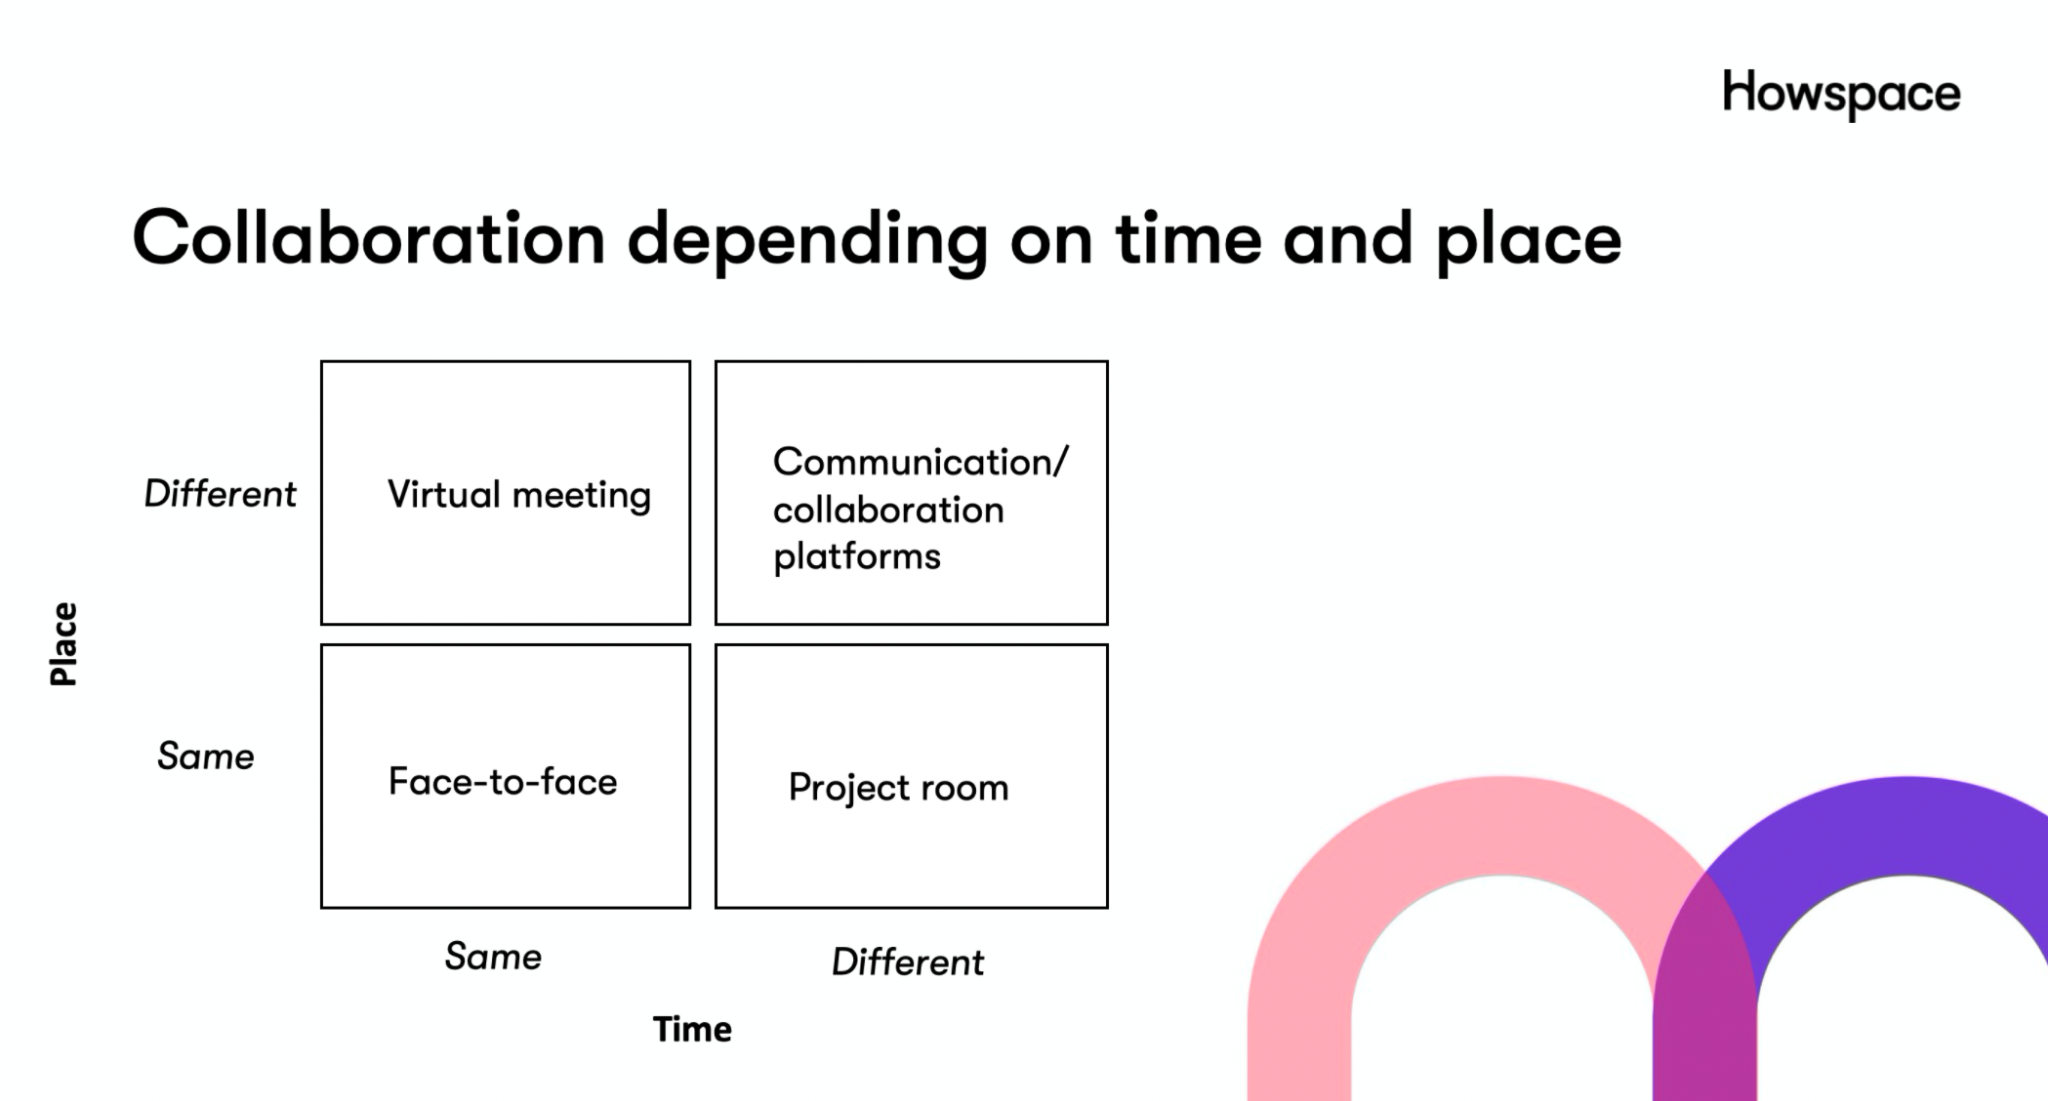 Collaboration depending on time and place grid